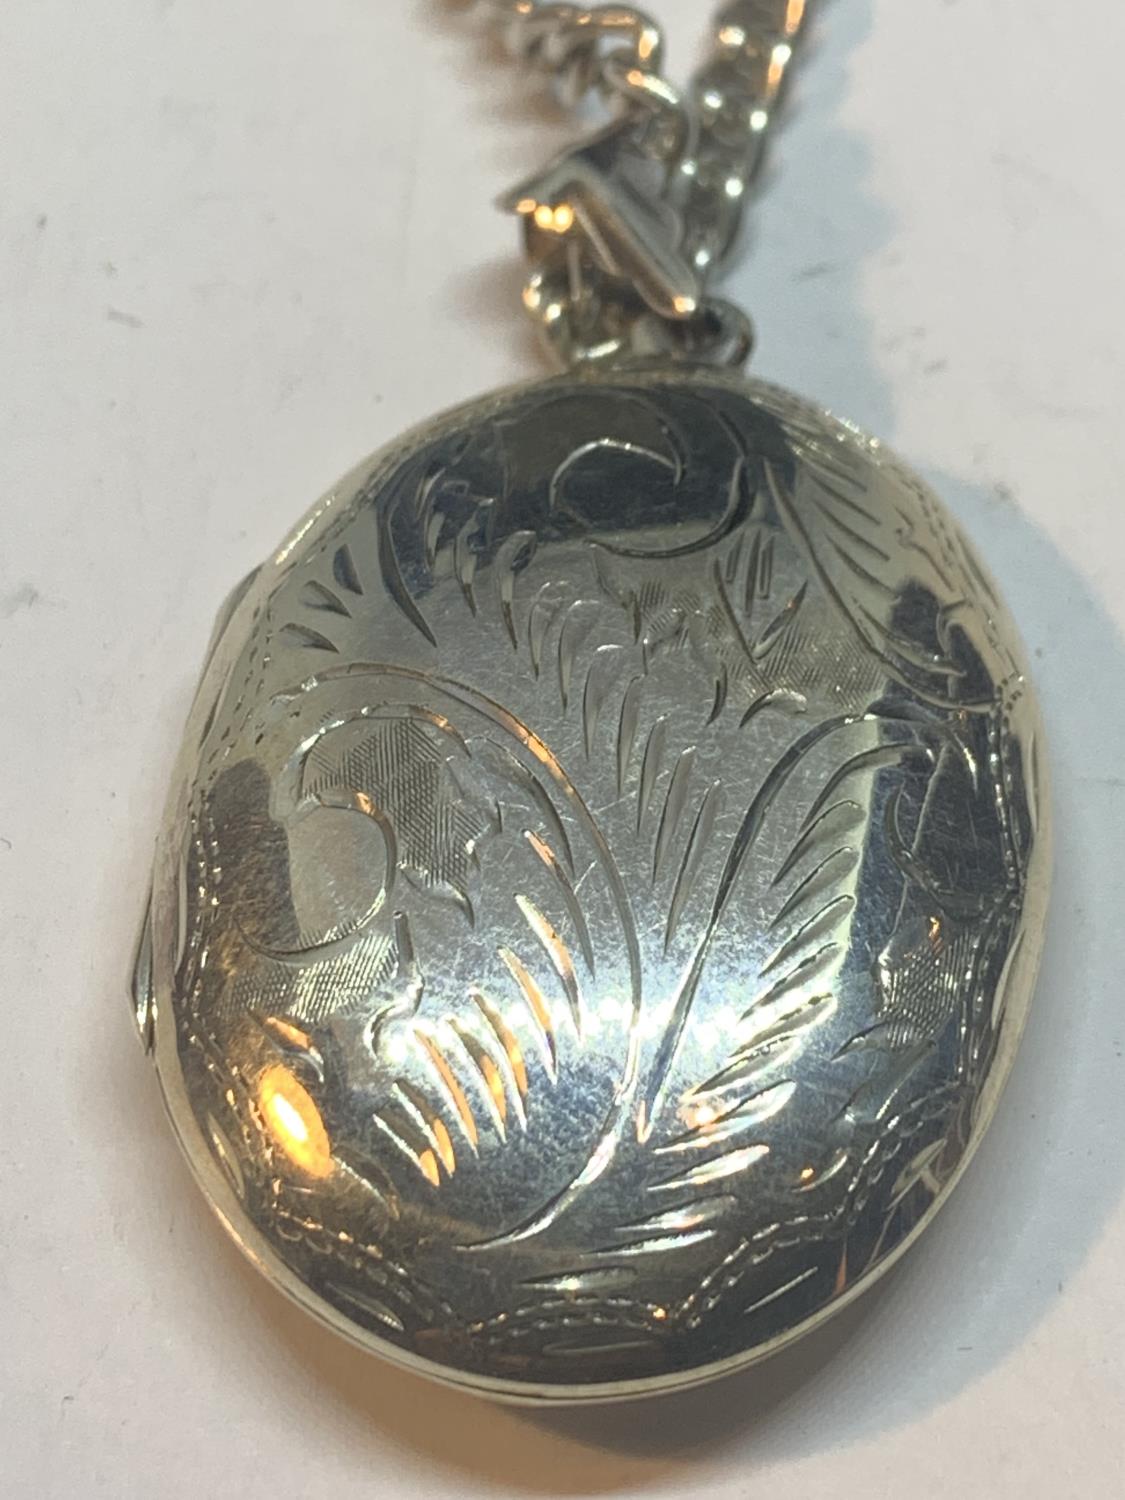 A SILVER NECKLACE WITH A LARGE OVAL LOCKET PENDANT - Image 3 of 4